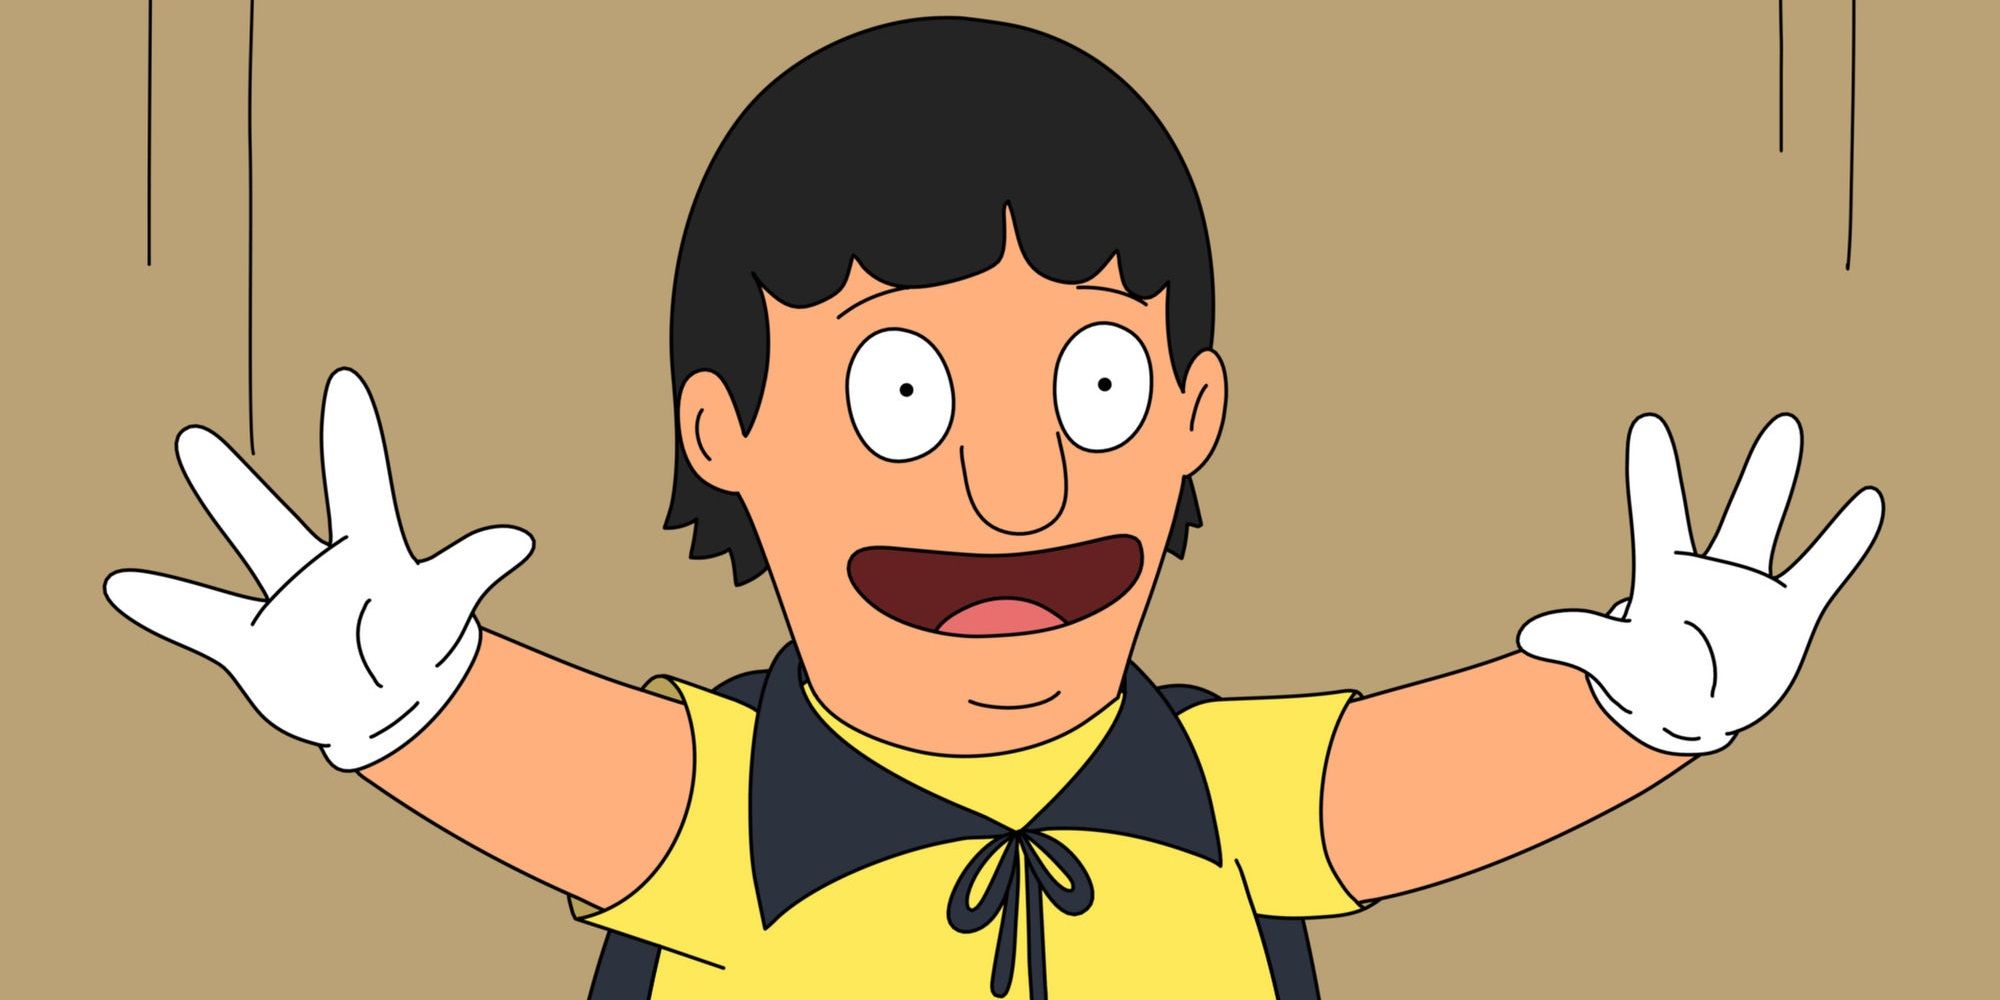 Gene Belcher wearing white gloves and cape and smiling in Bob's Burgers